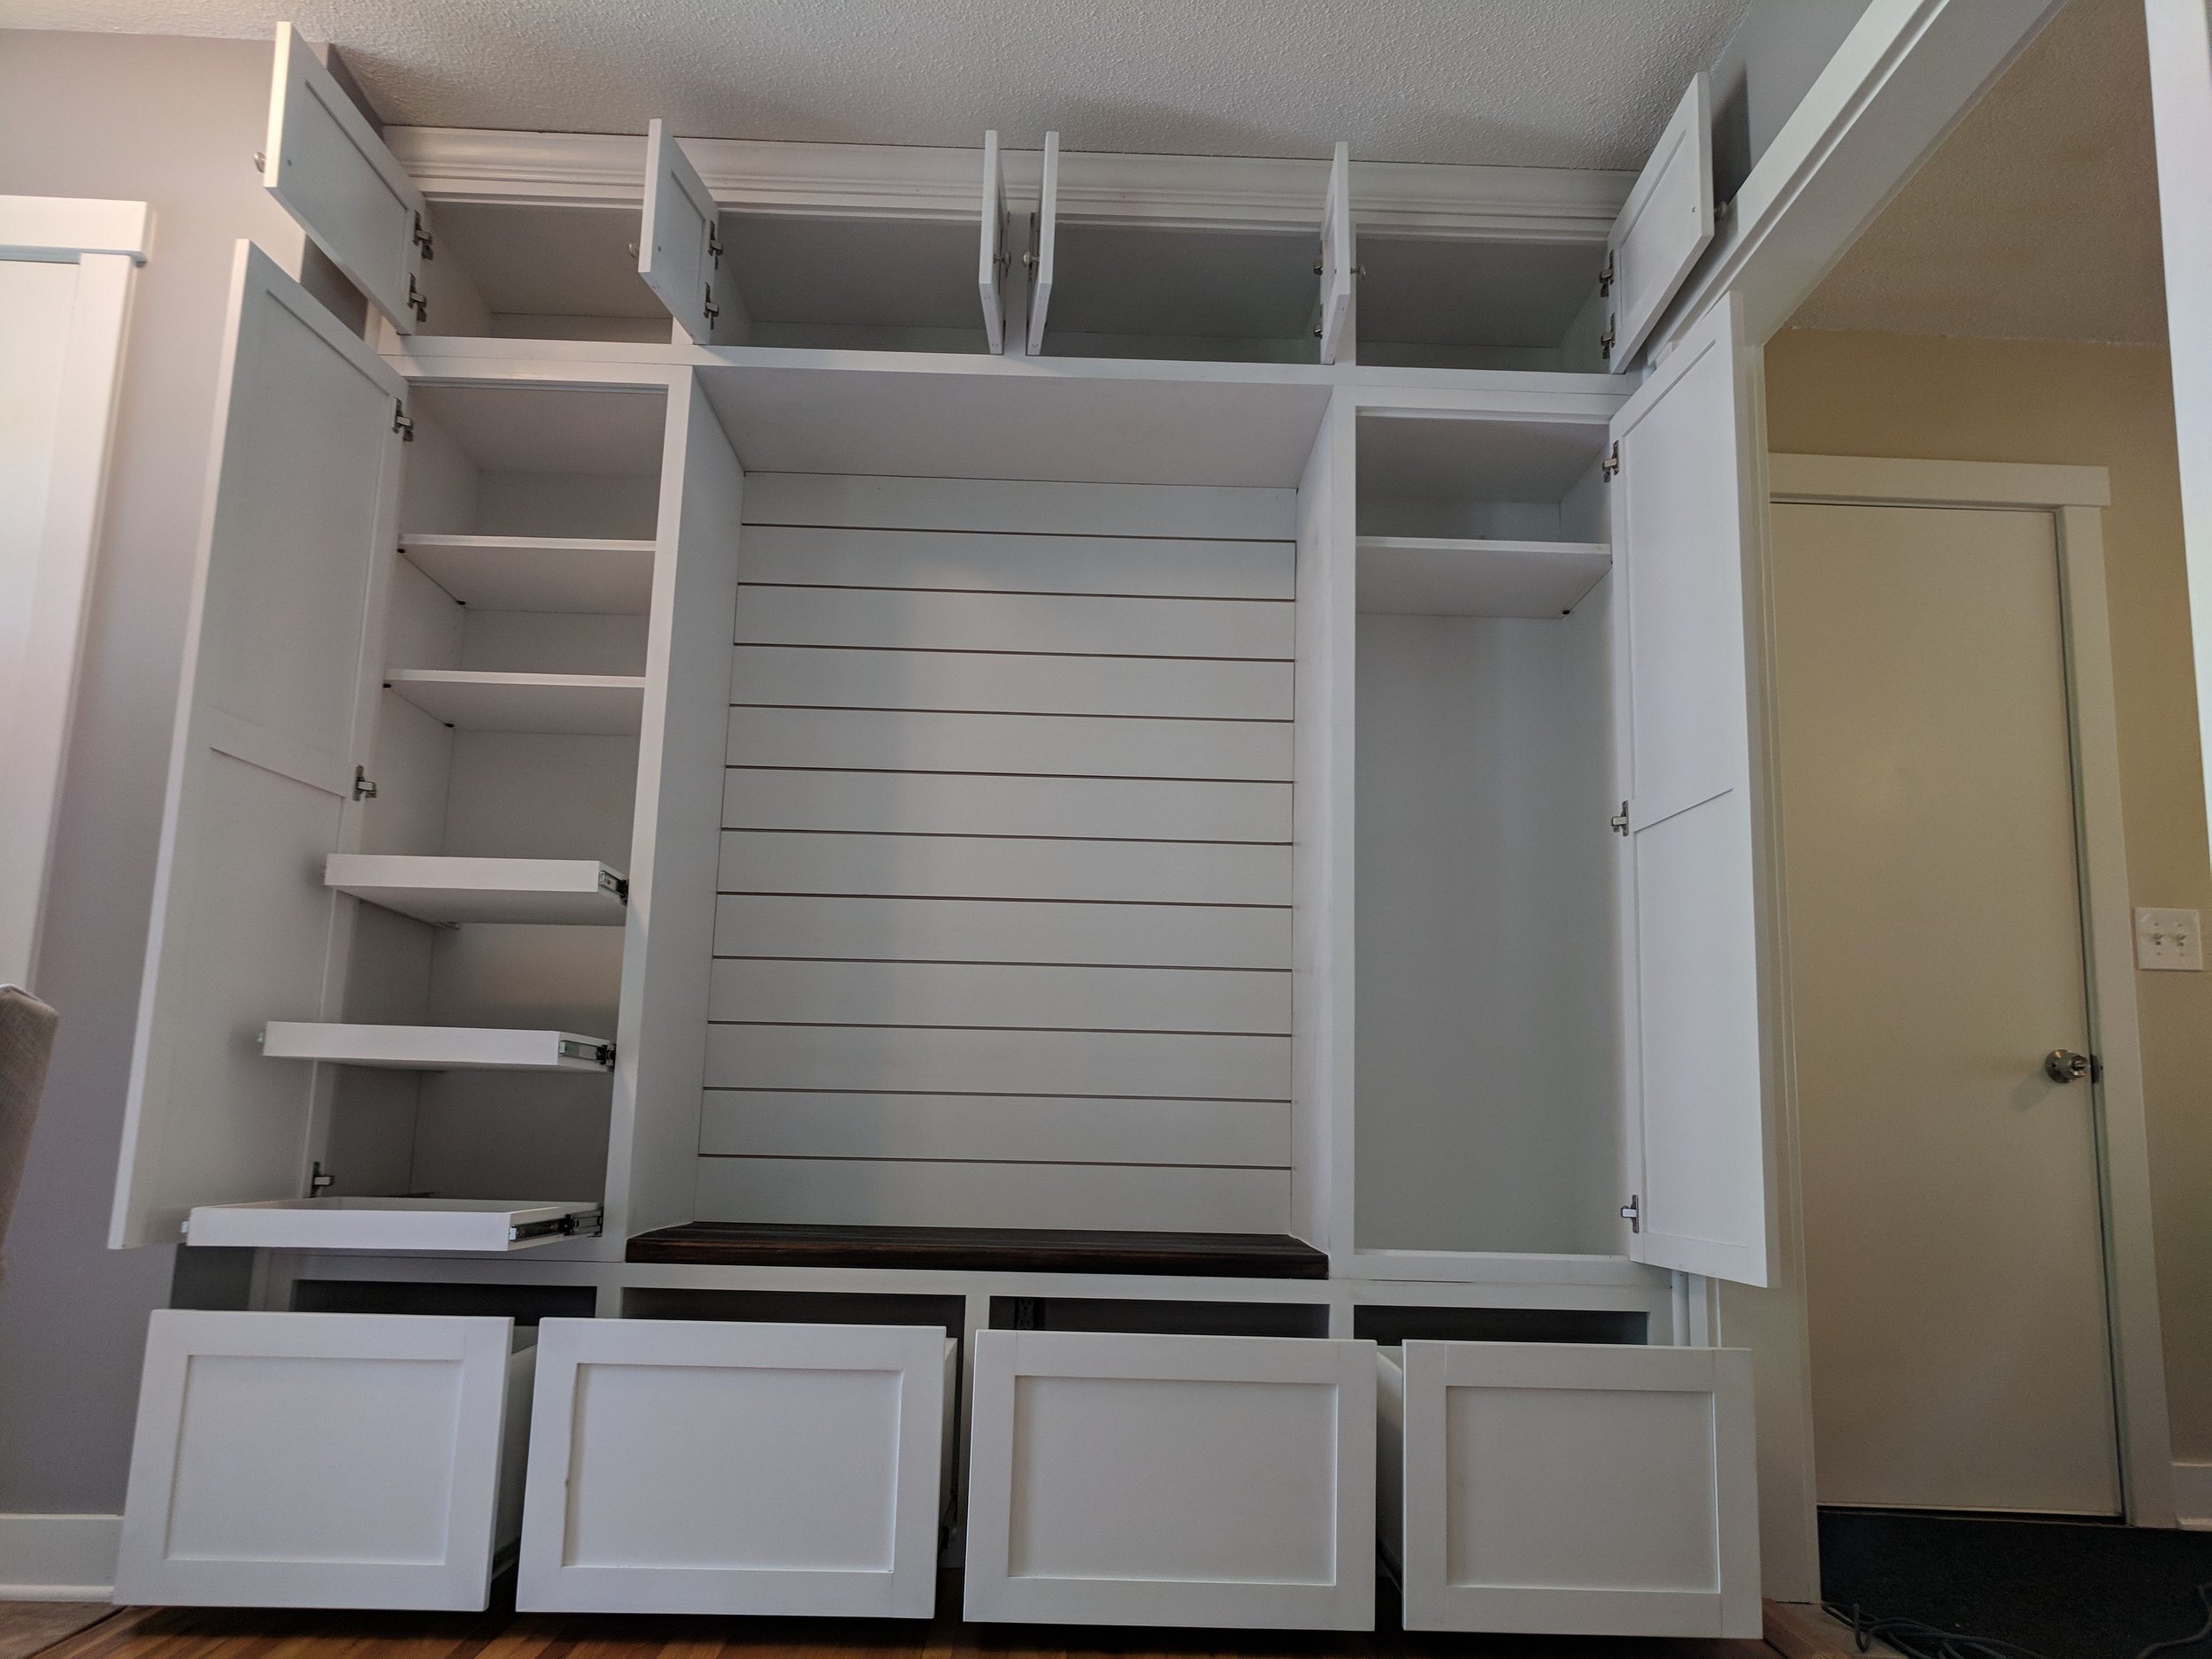  Custom design by customer including pullout drawers and adjustable shelves 